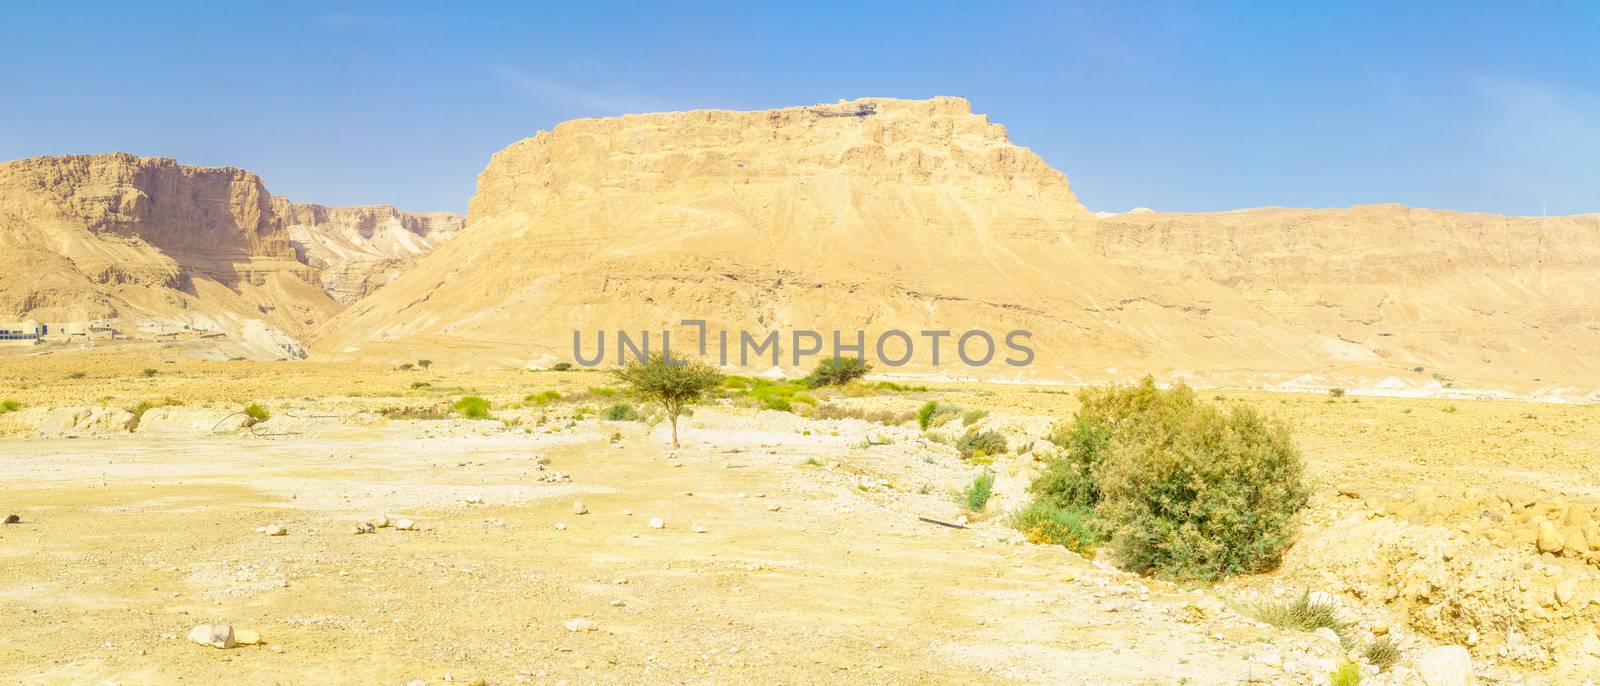 Panoramic view of the Masada fortress and the Judean Desert, near the Dead Sea, Southern Israel